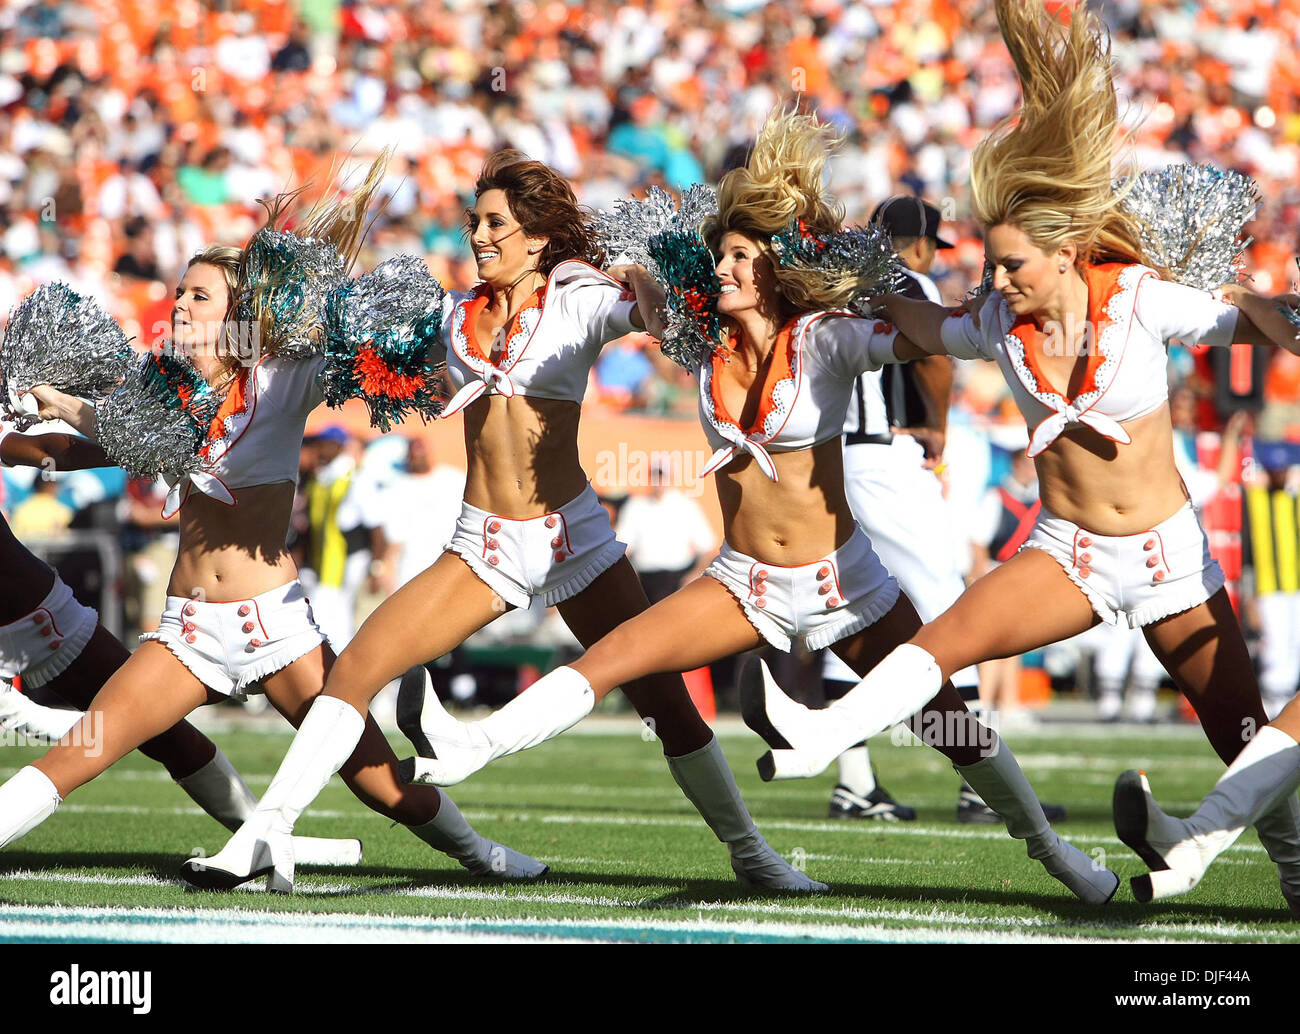 Dec 30, 2007 - Miami Gardens, Florida, USA - Dolphins cheerleaders in action during second half action Sunday at Dolphin stadium in Miami Gardens. (Credit Image: © Bill Ingram/Palm Beach Post/ZUMA Press) RESTRICTIONS: * USA Tabloids Rights OUT * Stock Photo